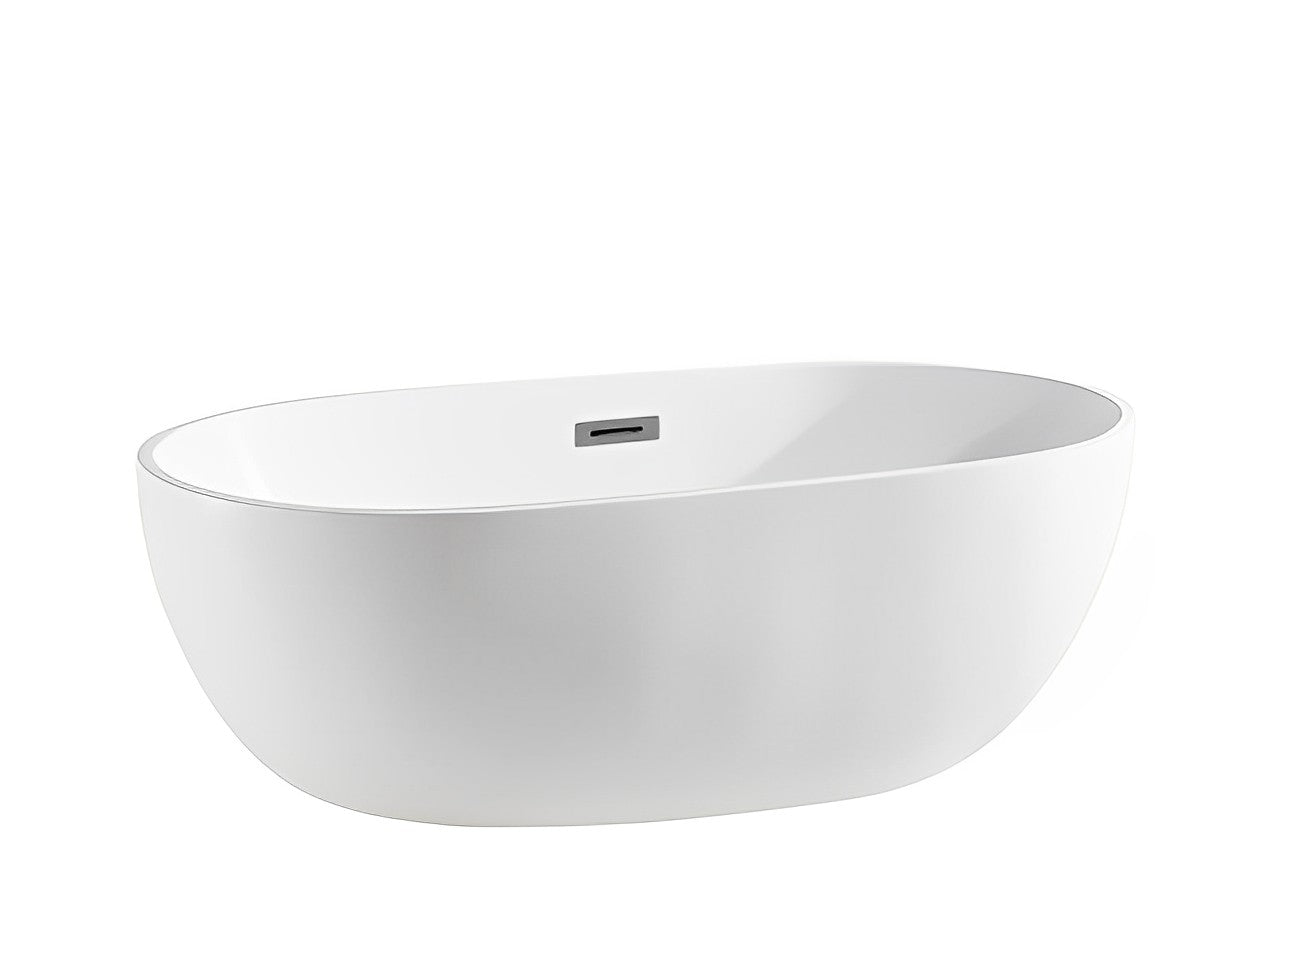 POSEIDON OLIVIA FREE STANDING BATH GLOSS WHITE (AVAILABLE IN 1400MM, 1530MM AND 1700MM)